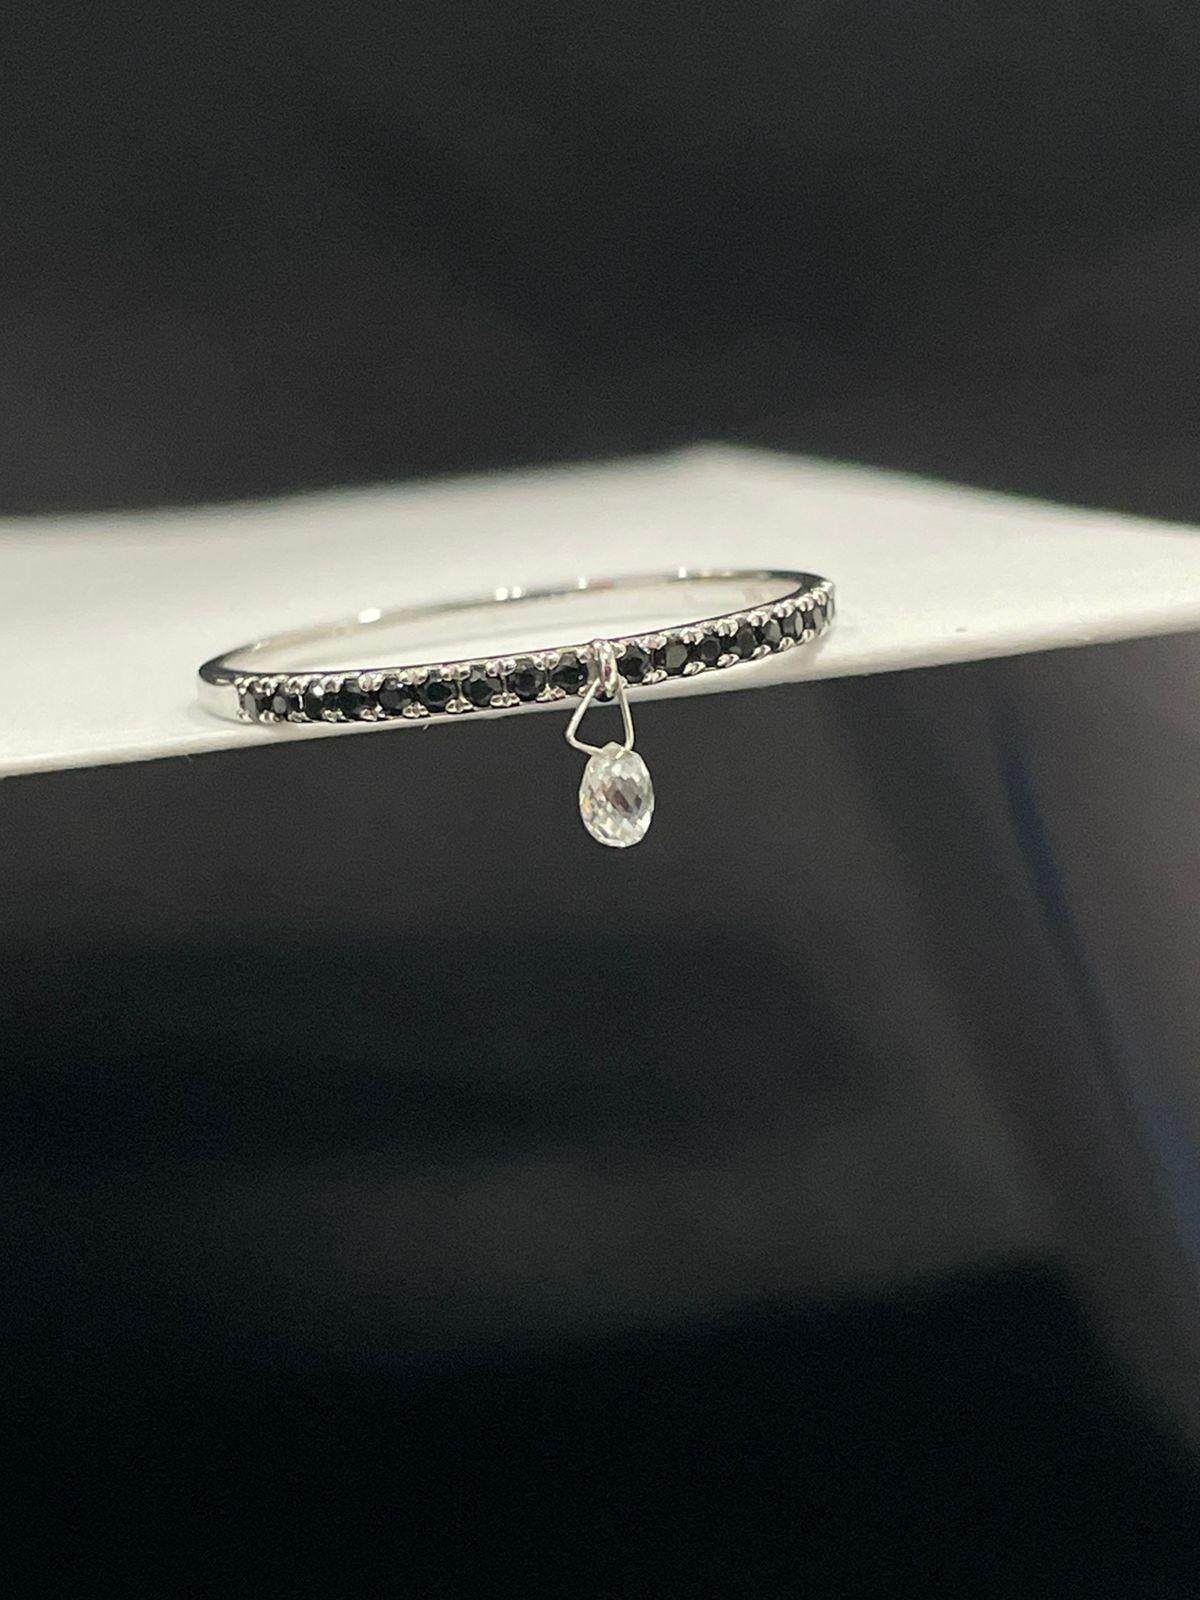 PANIM Mono Briolette Diamond & Black Diamond 18K White Gold Ring

Inspired by the beauty of a rain drop, Our eccentric Dangling diamond ring is an absolute show-stopper. It has 1 pieces Rain Drops White Diamond Briolette's set with black